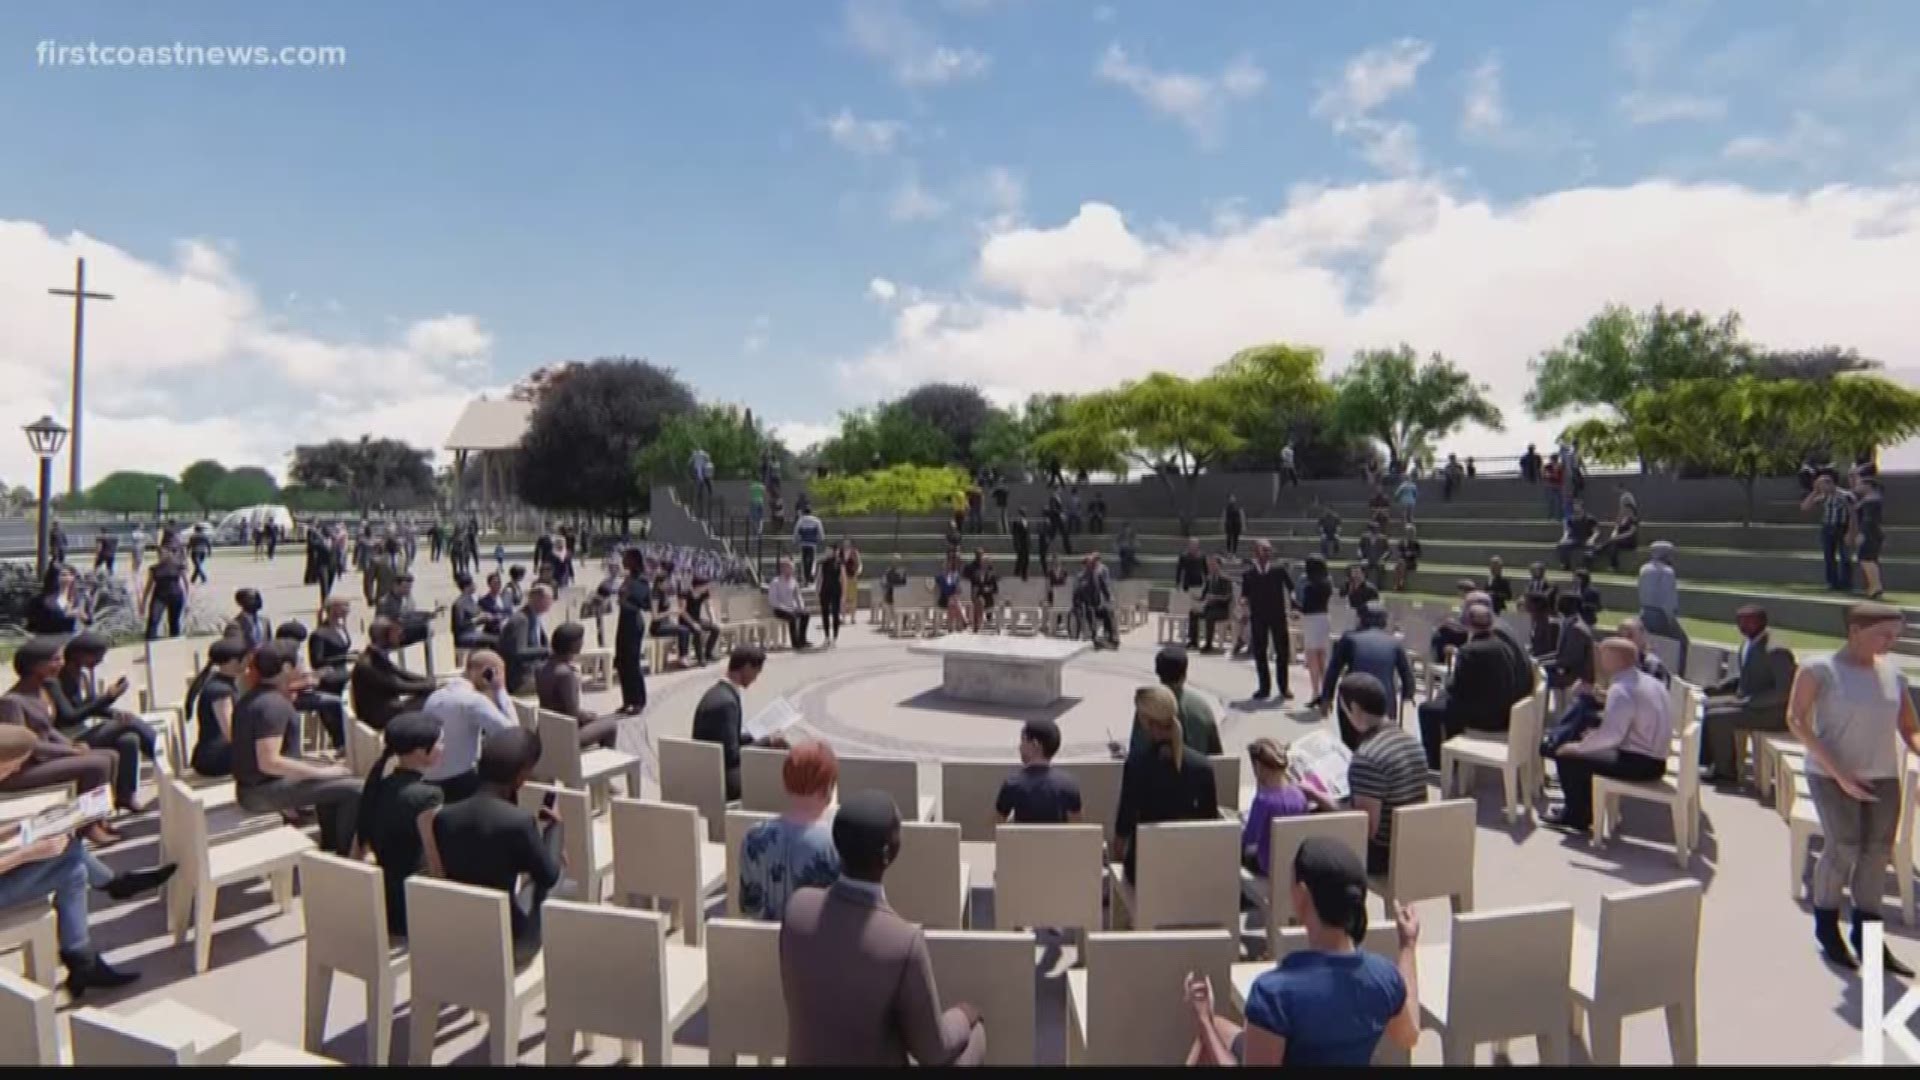 On the mission grounds, the Catholic Diocese is asking the city’s permission to build an amphitheater that would hold up to 1200 people and possibly a parking garage.